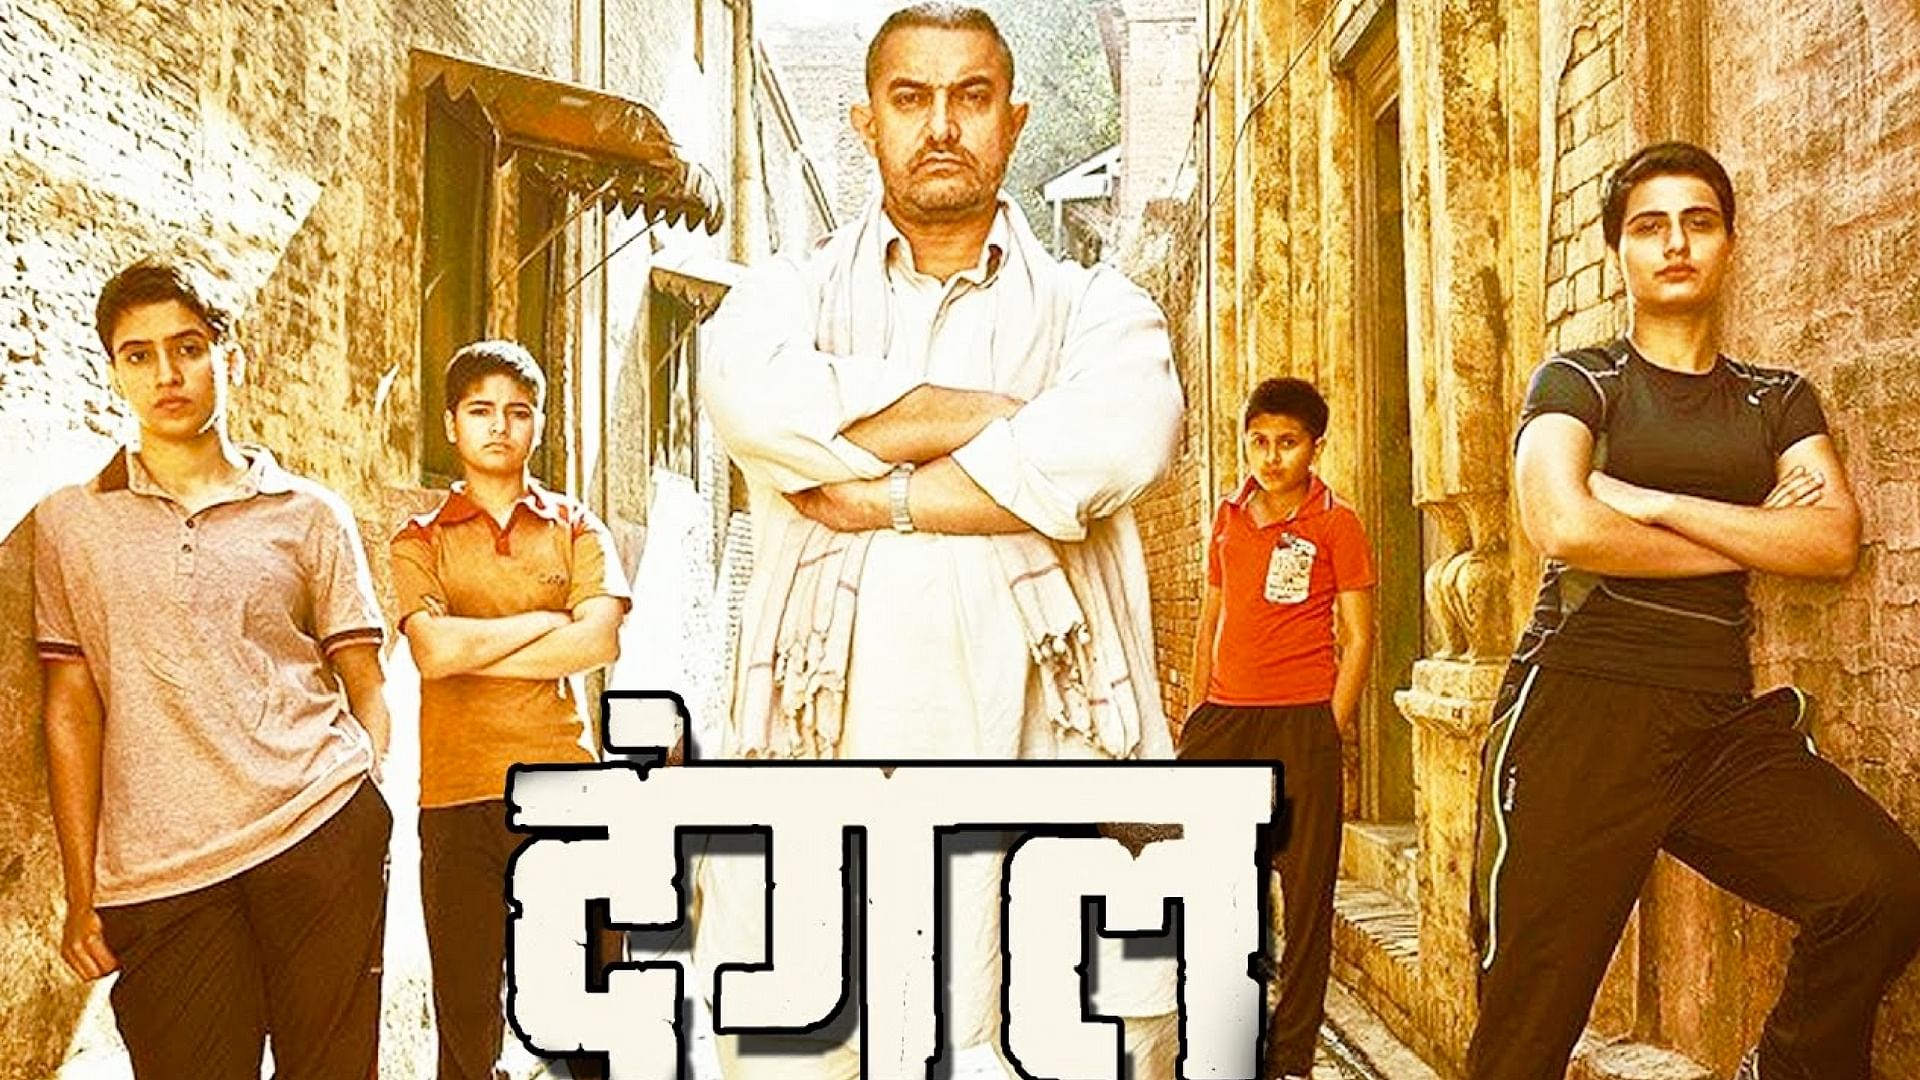 Dangal has a special screening for women. (Photo Courtesy: Film poster)